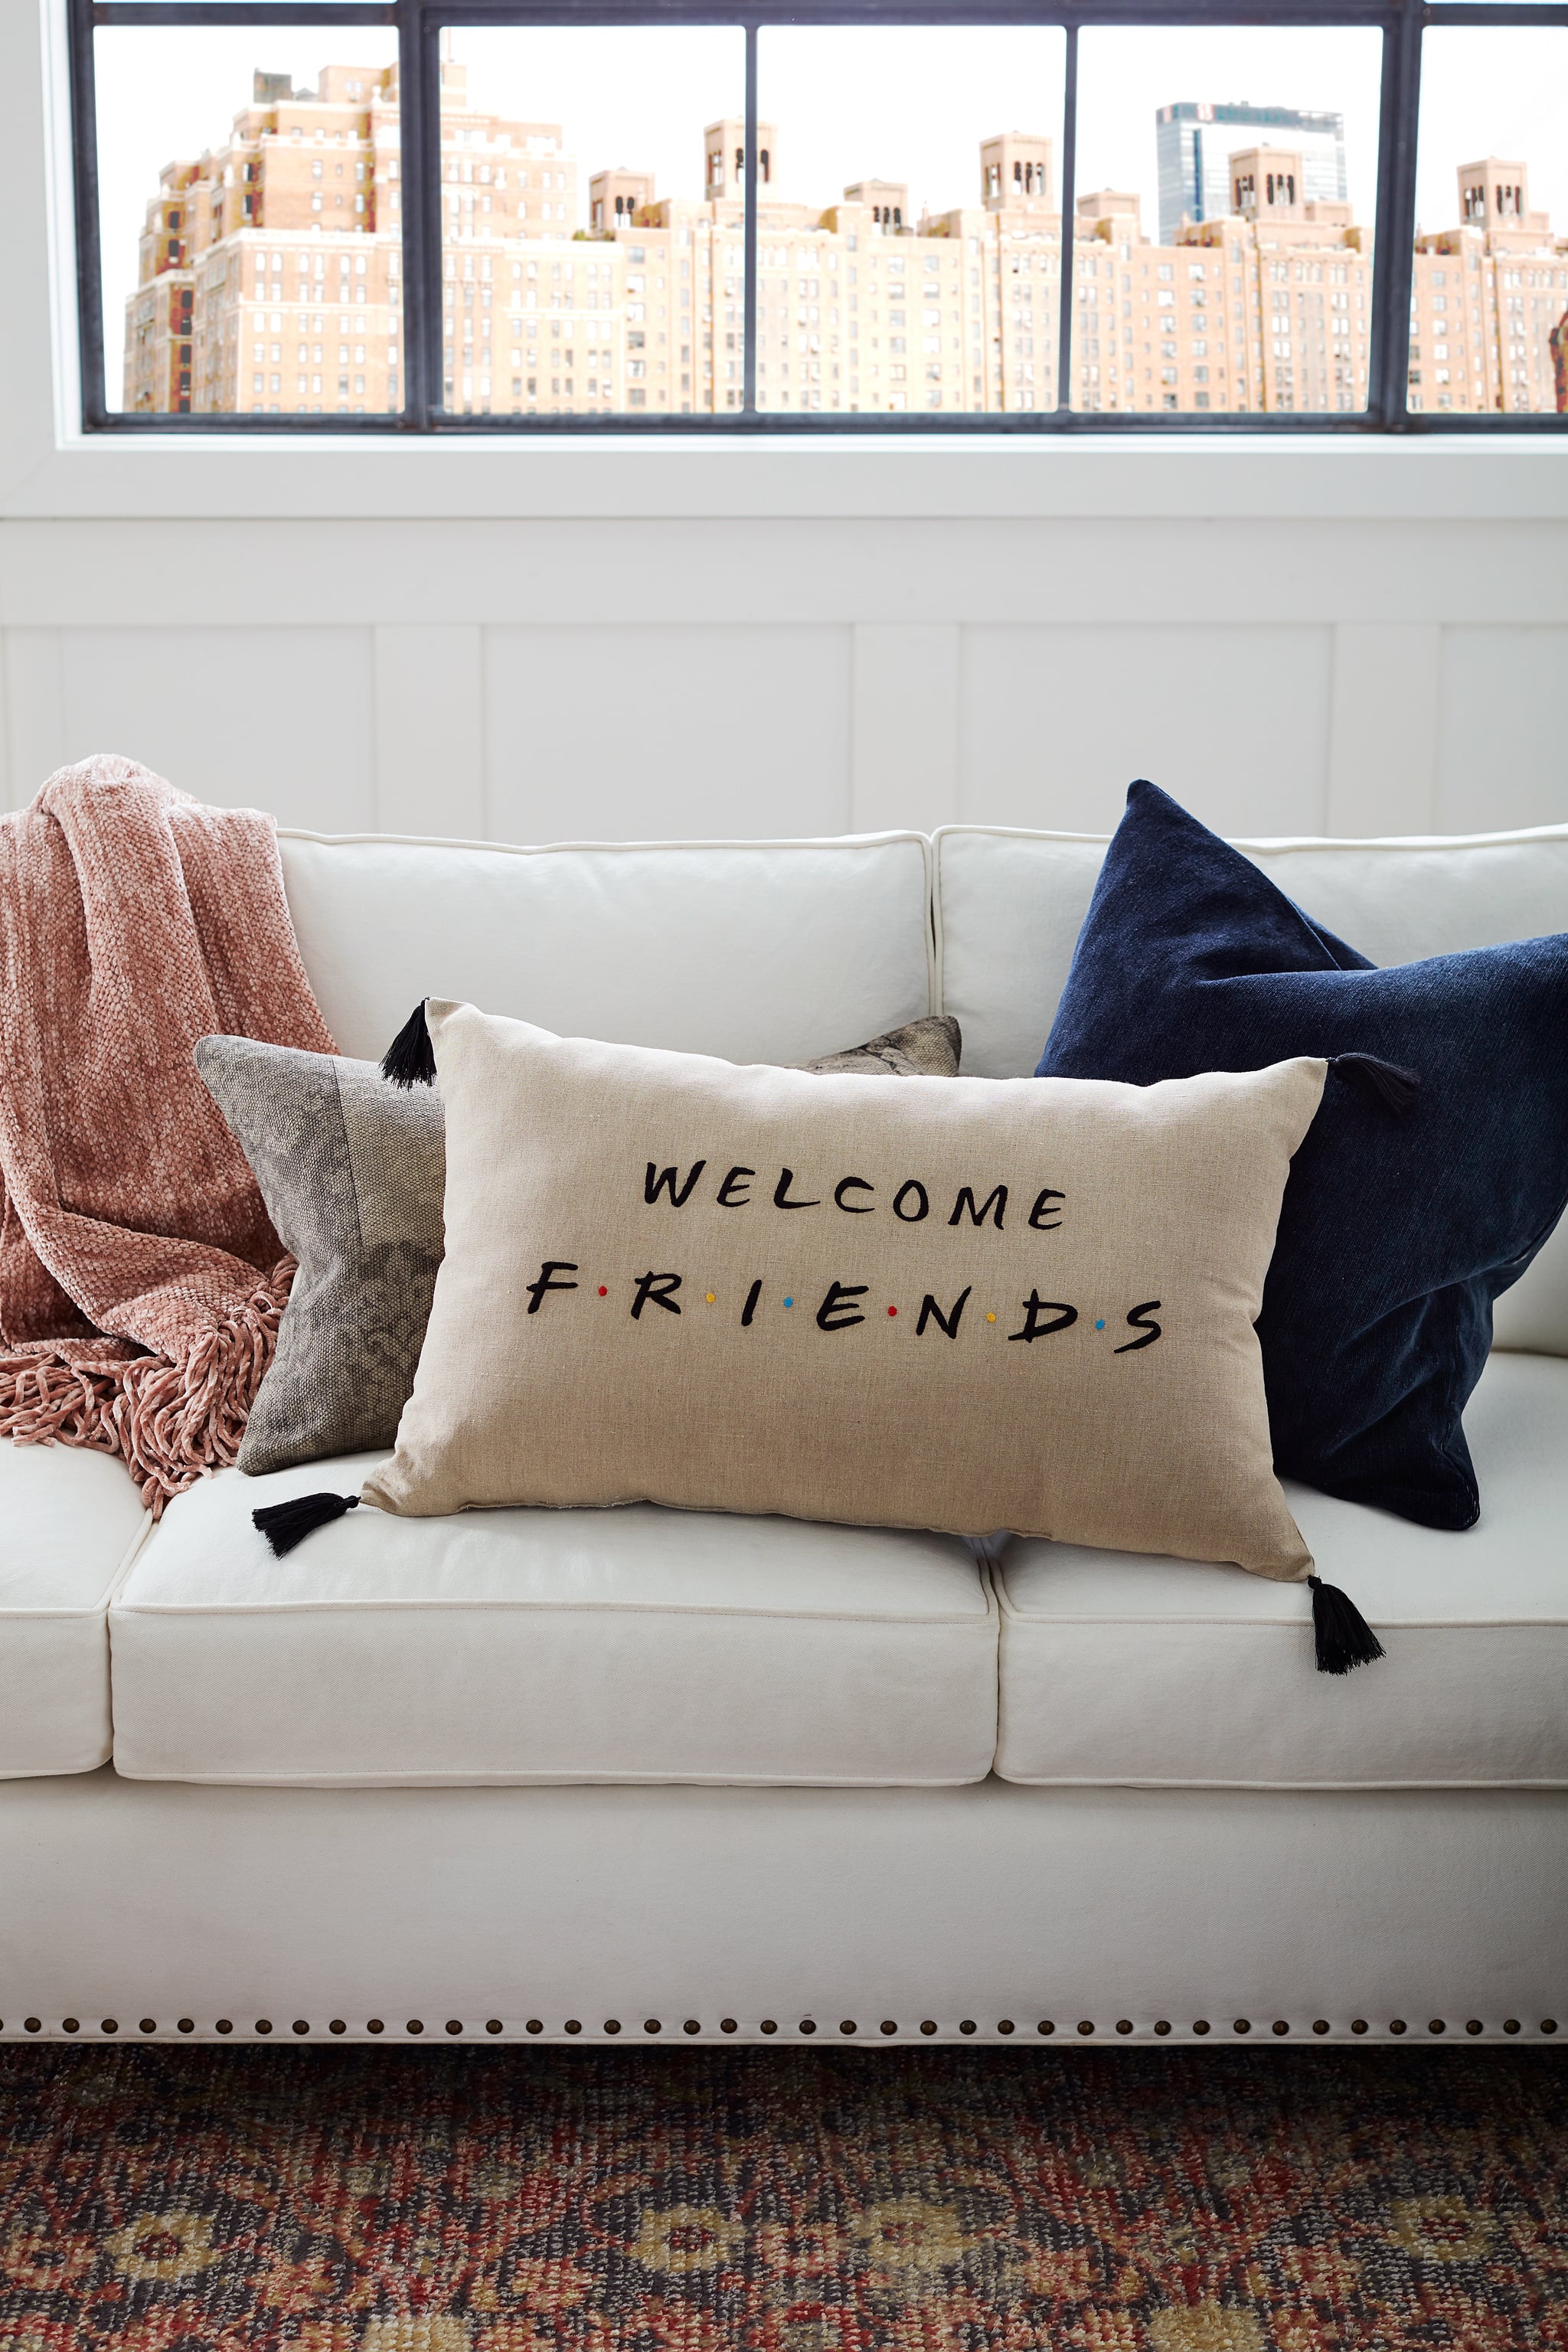 Pottery Barn Friends Collection